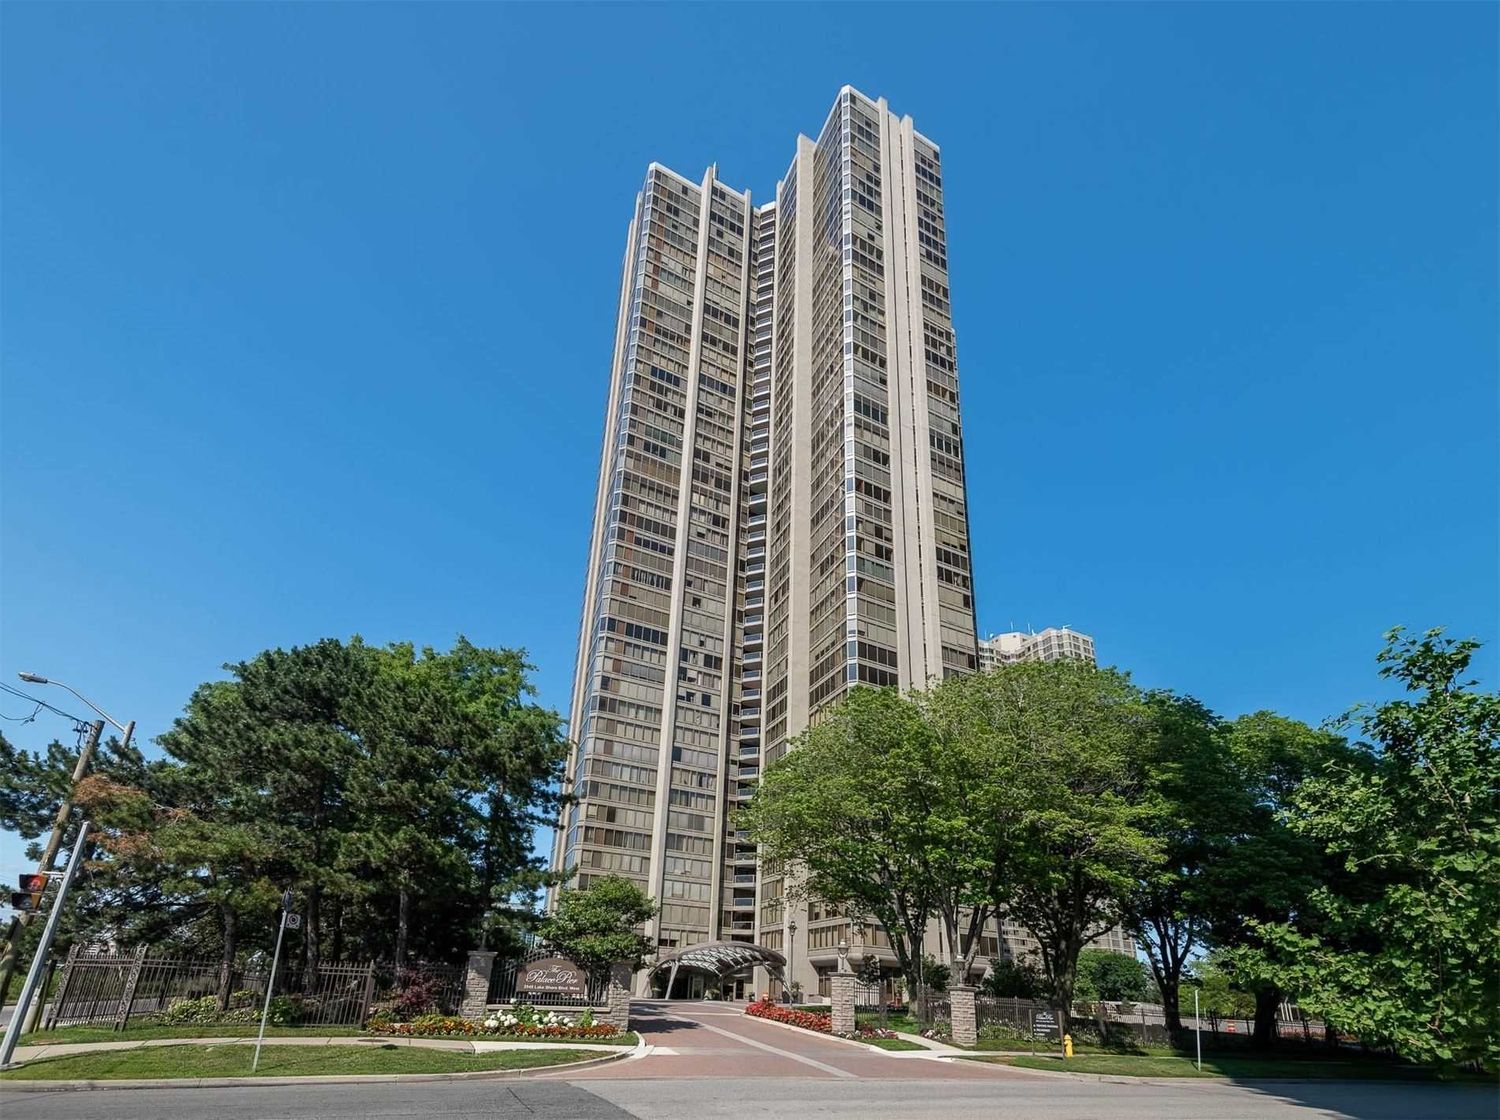 2045 Lake Shore Boulevard W. The Palace Pier Condos is located in  Etobicoke, Toronto - image #1 of 2